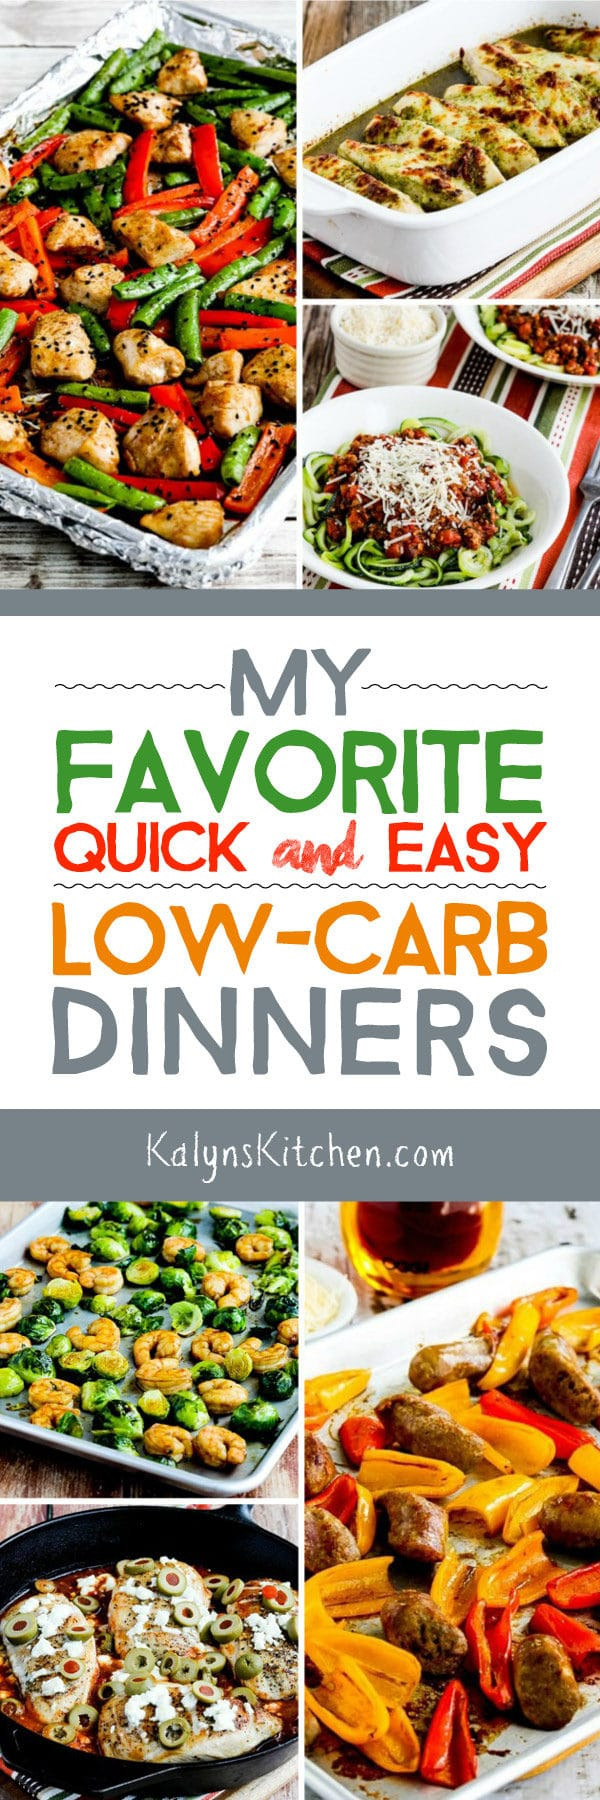 Quick Low Carb Dinners
 My Favorite Quick and Easy Low Carb Dinners Kalyn s Kitchen